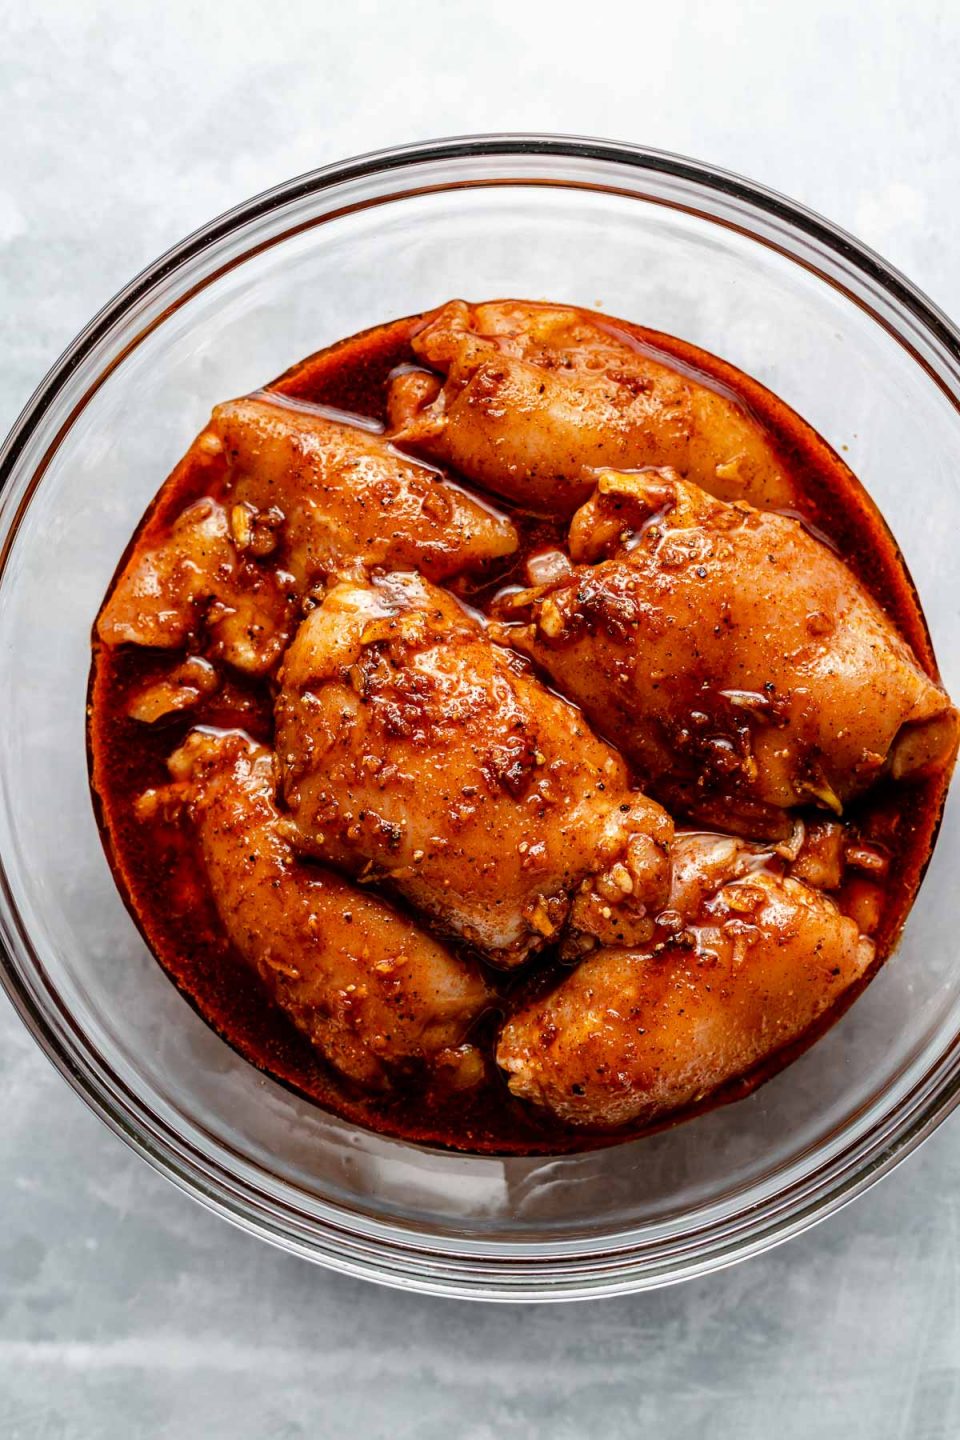 Chicken thighs in a large glass mixing bowl, marinating in All-Purpose marinade. The bowl sits atop a light blue surface.